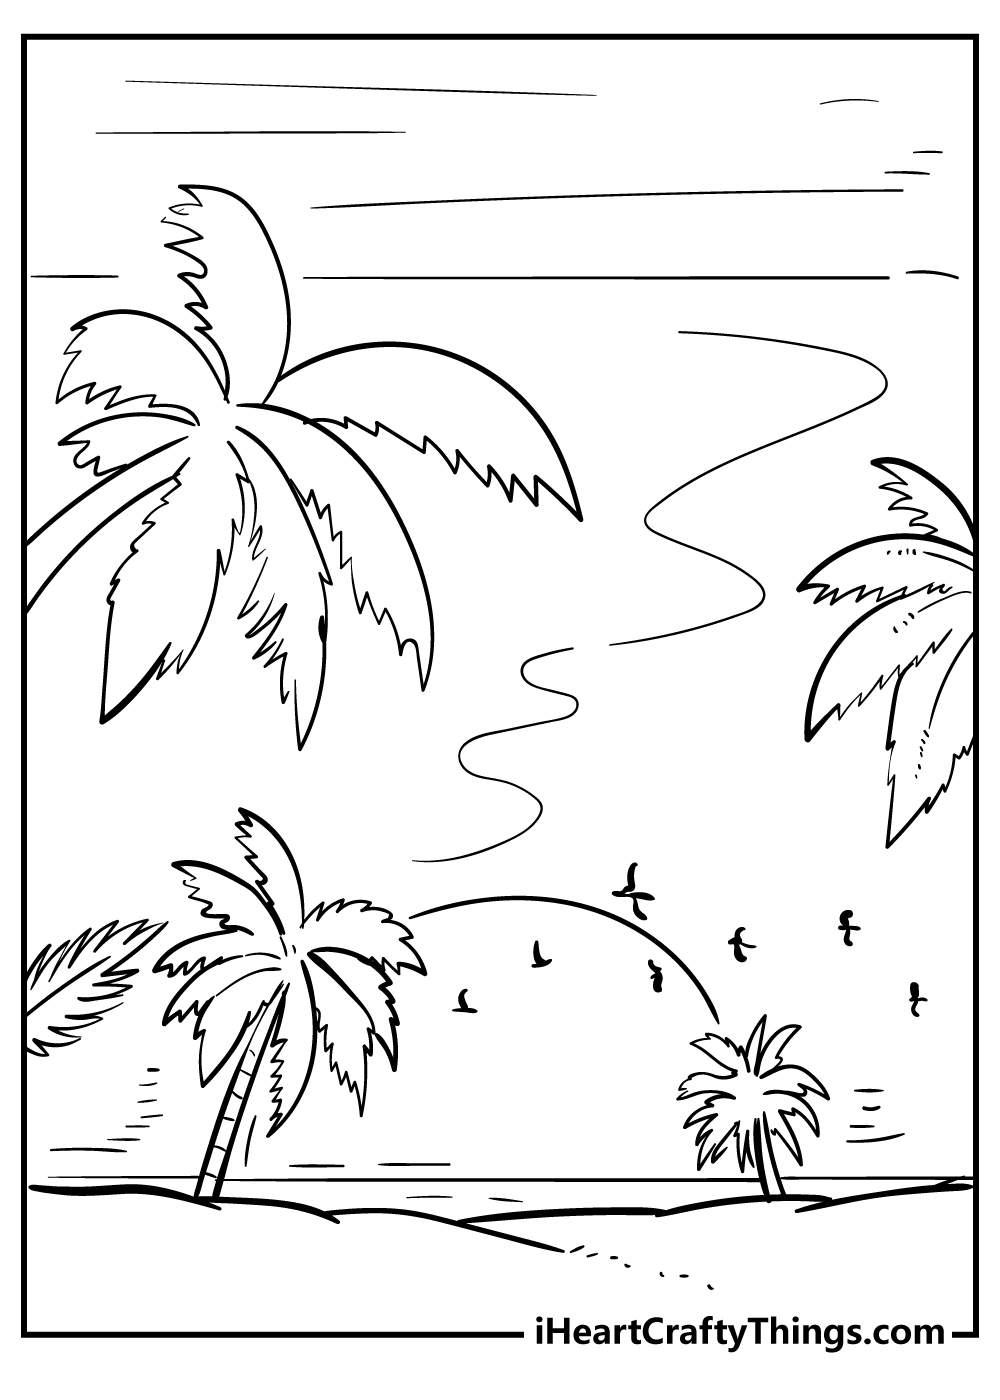 Sunset Coloring Pages for kids free download